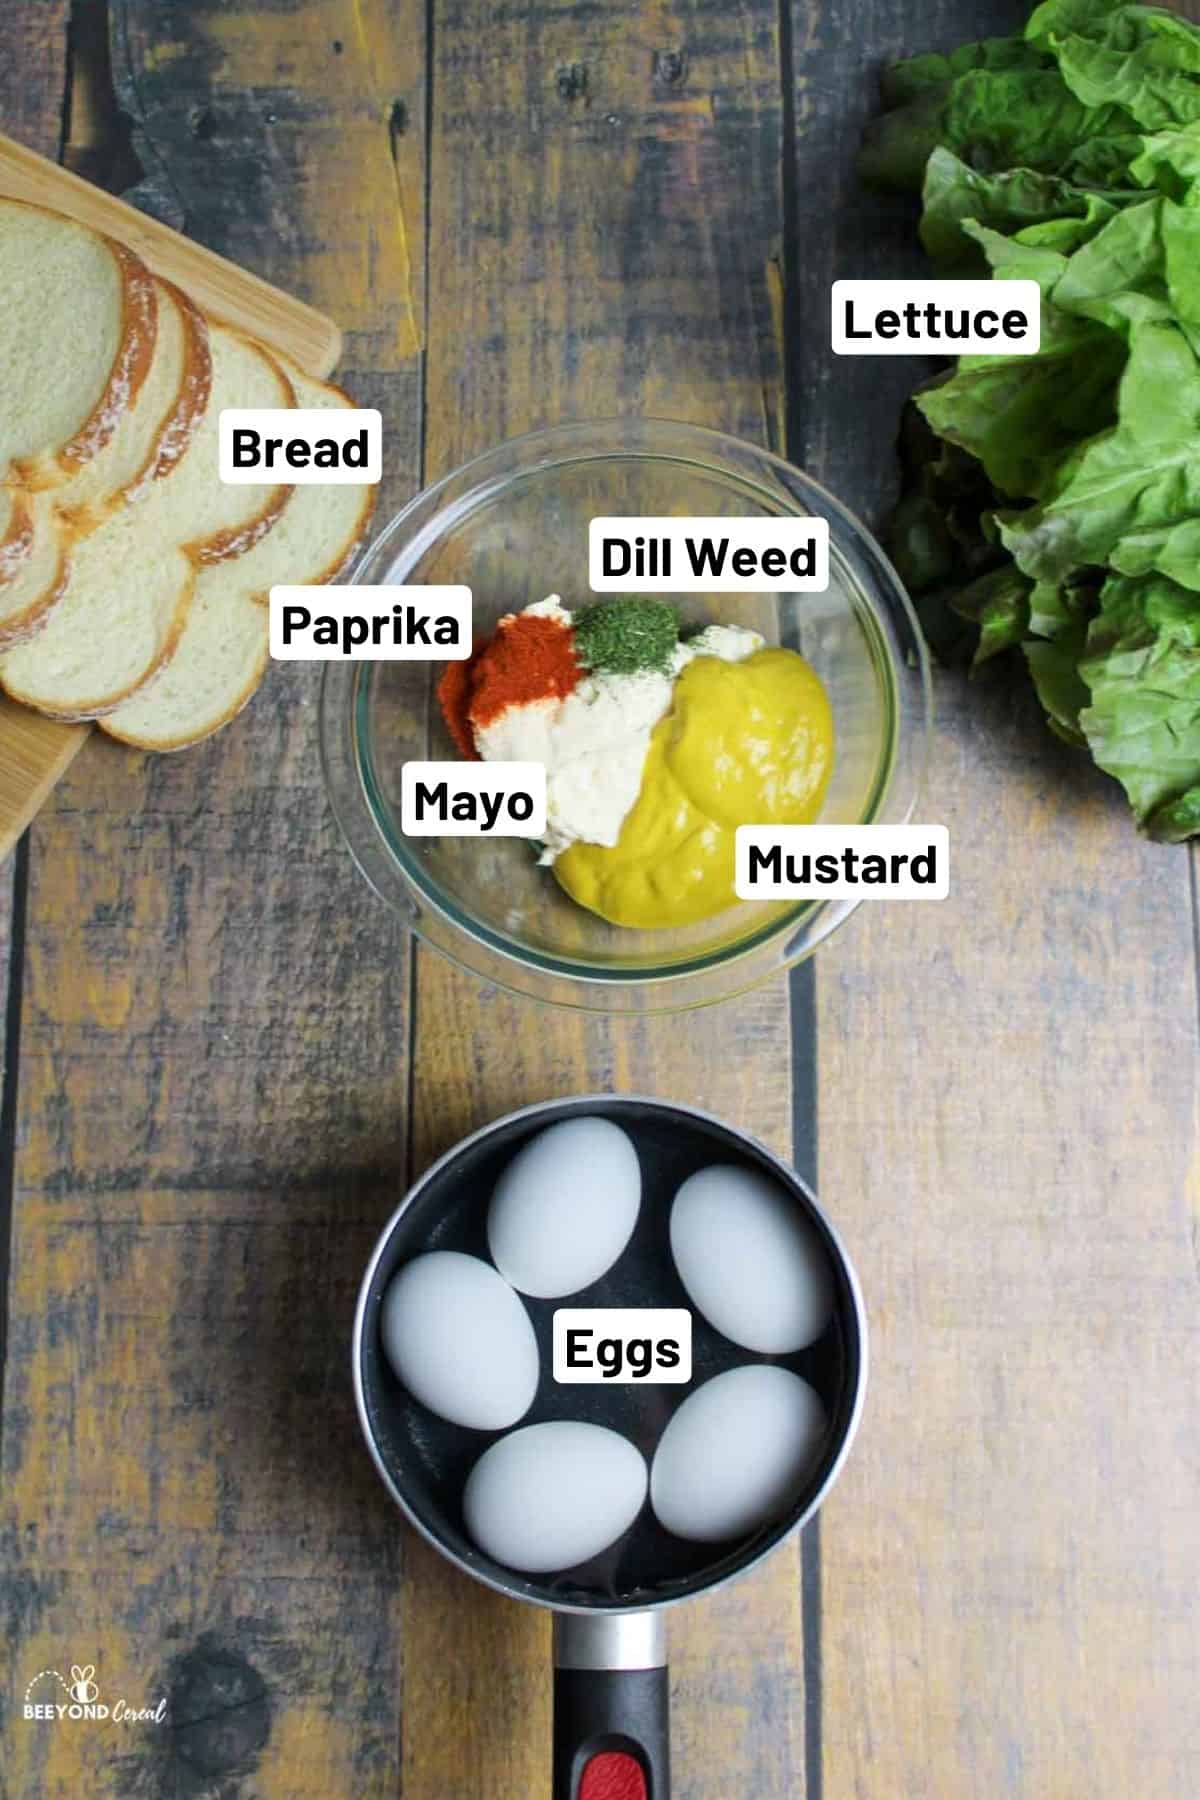 ingredients needed to make egg salad sandwiches.